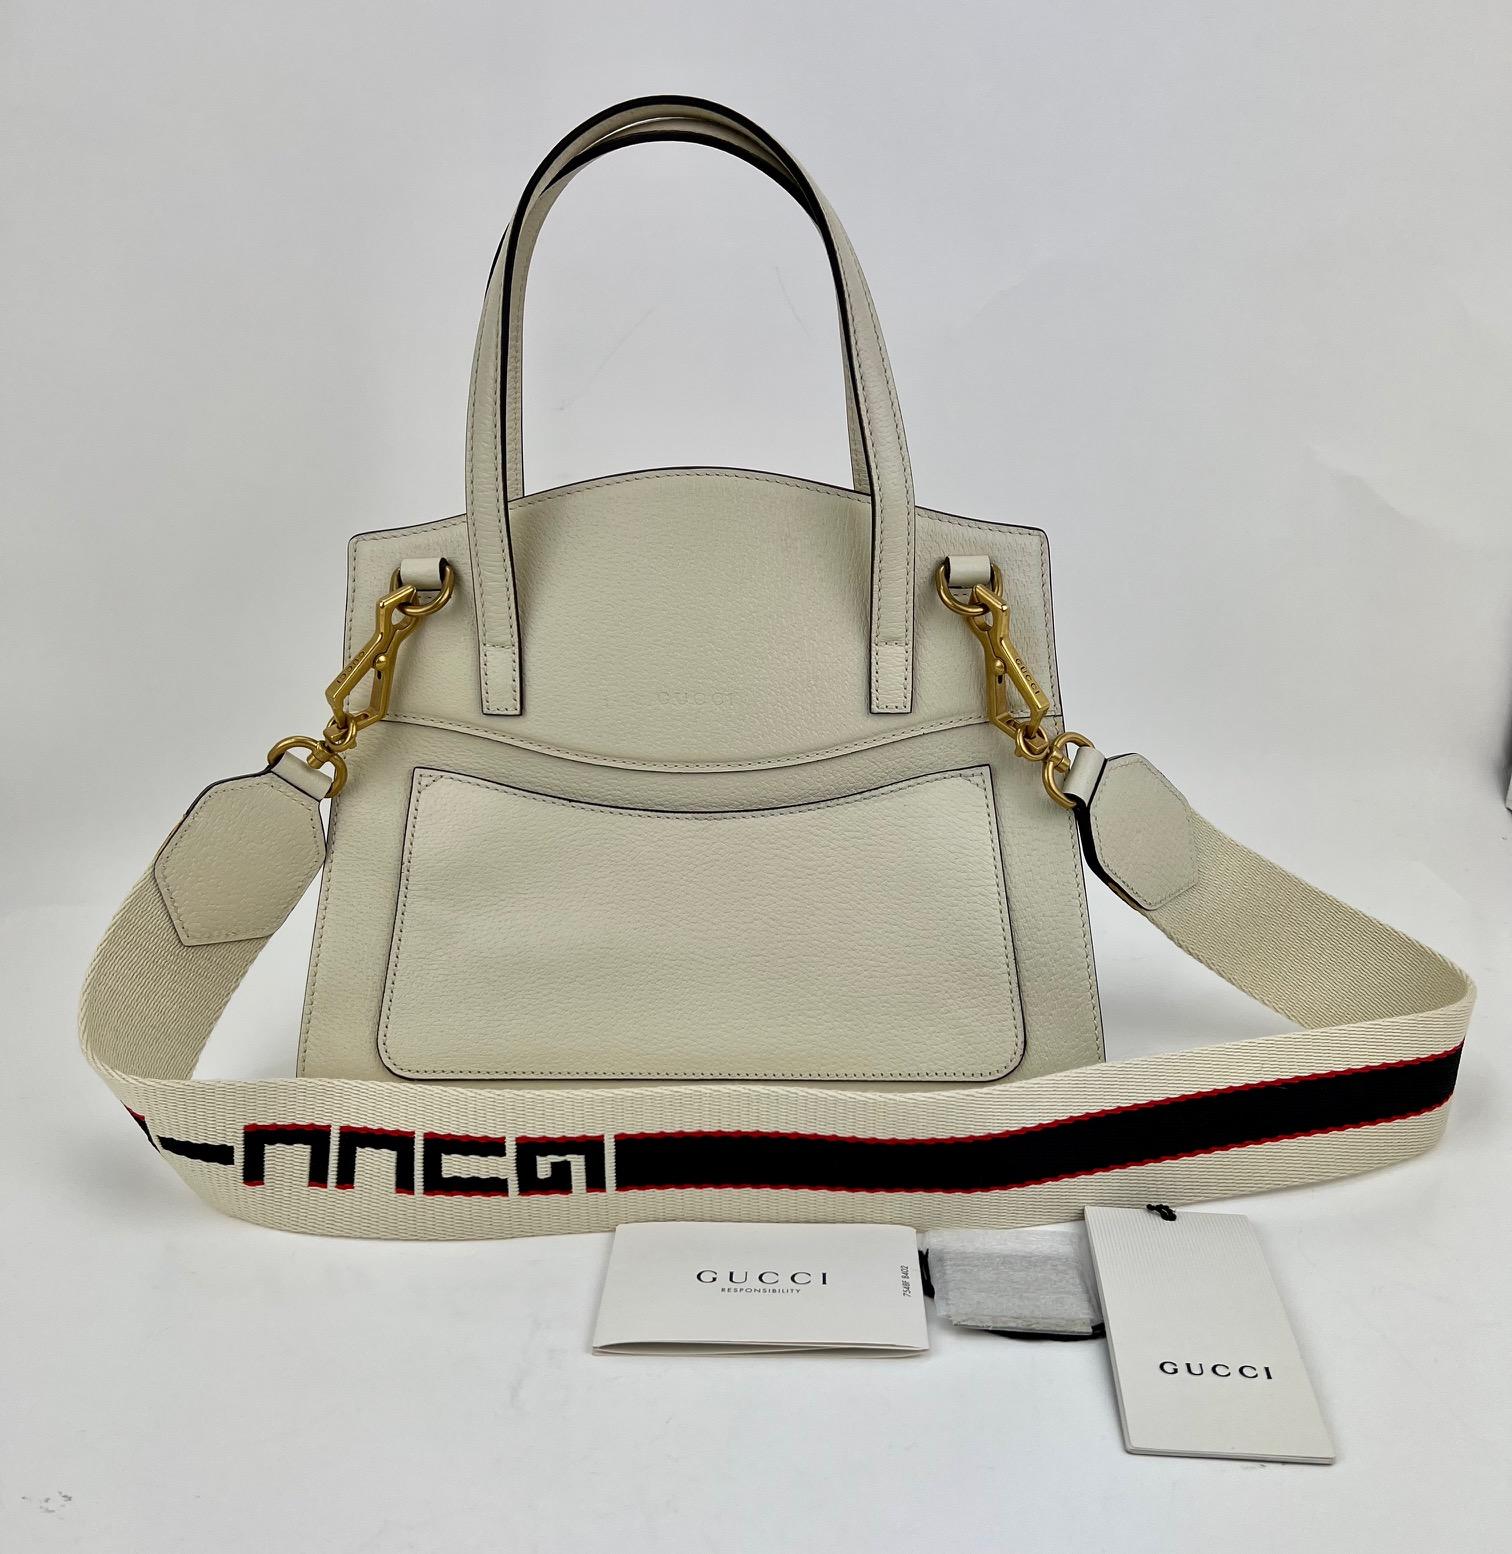 Pre-Owned  100% Authentic
GUCCI Linea Medium Totem Web Stripped
Yellow Butterfly Top Handle Bag
RATING: A...excellent, near mint, only
slight signs of wear
MATERIAL: grained calfskin, canvas
STRAP: Gucci Canvas removable
Strap: 39'' long
DROP: